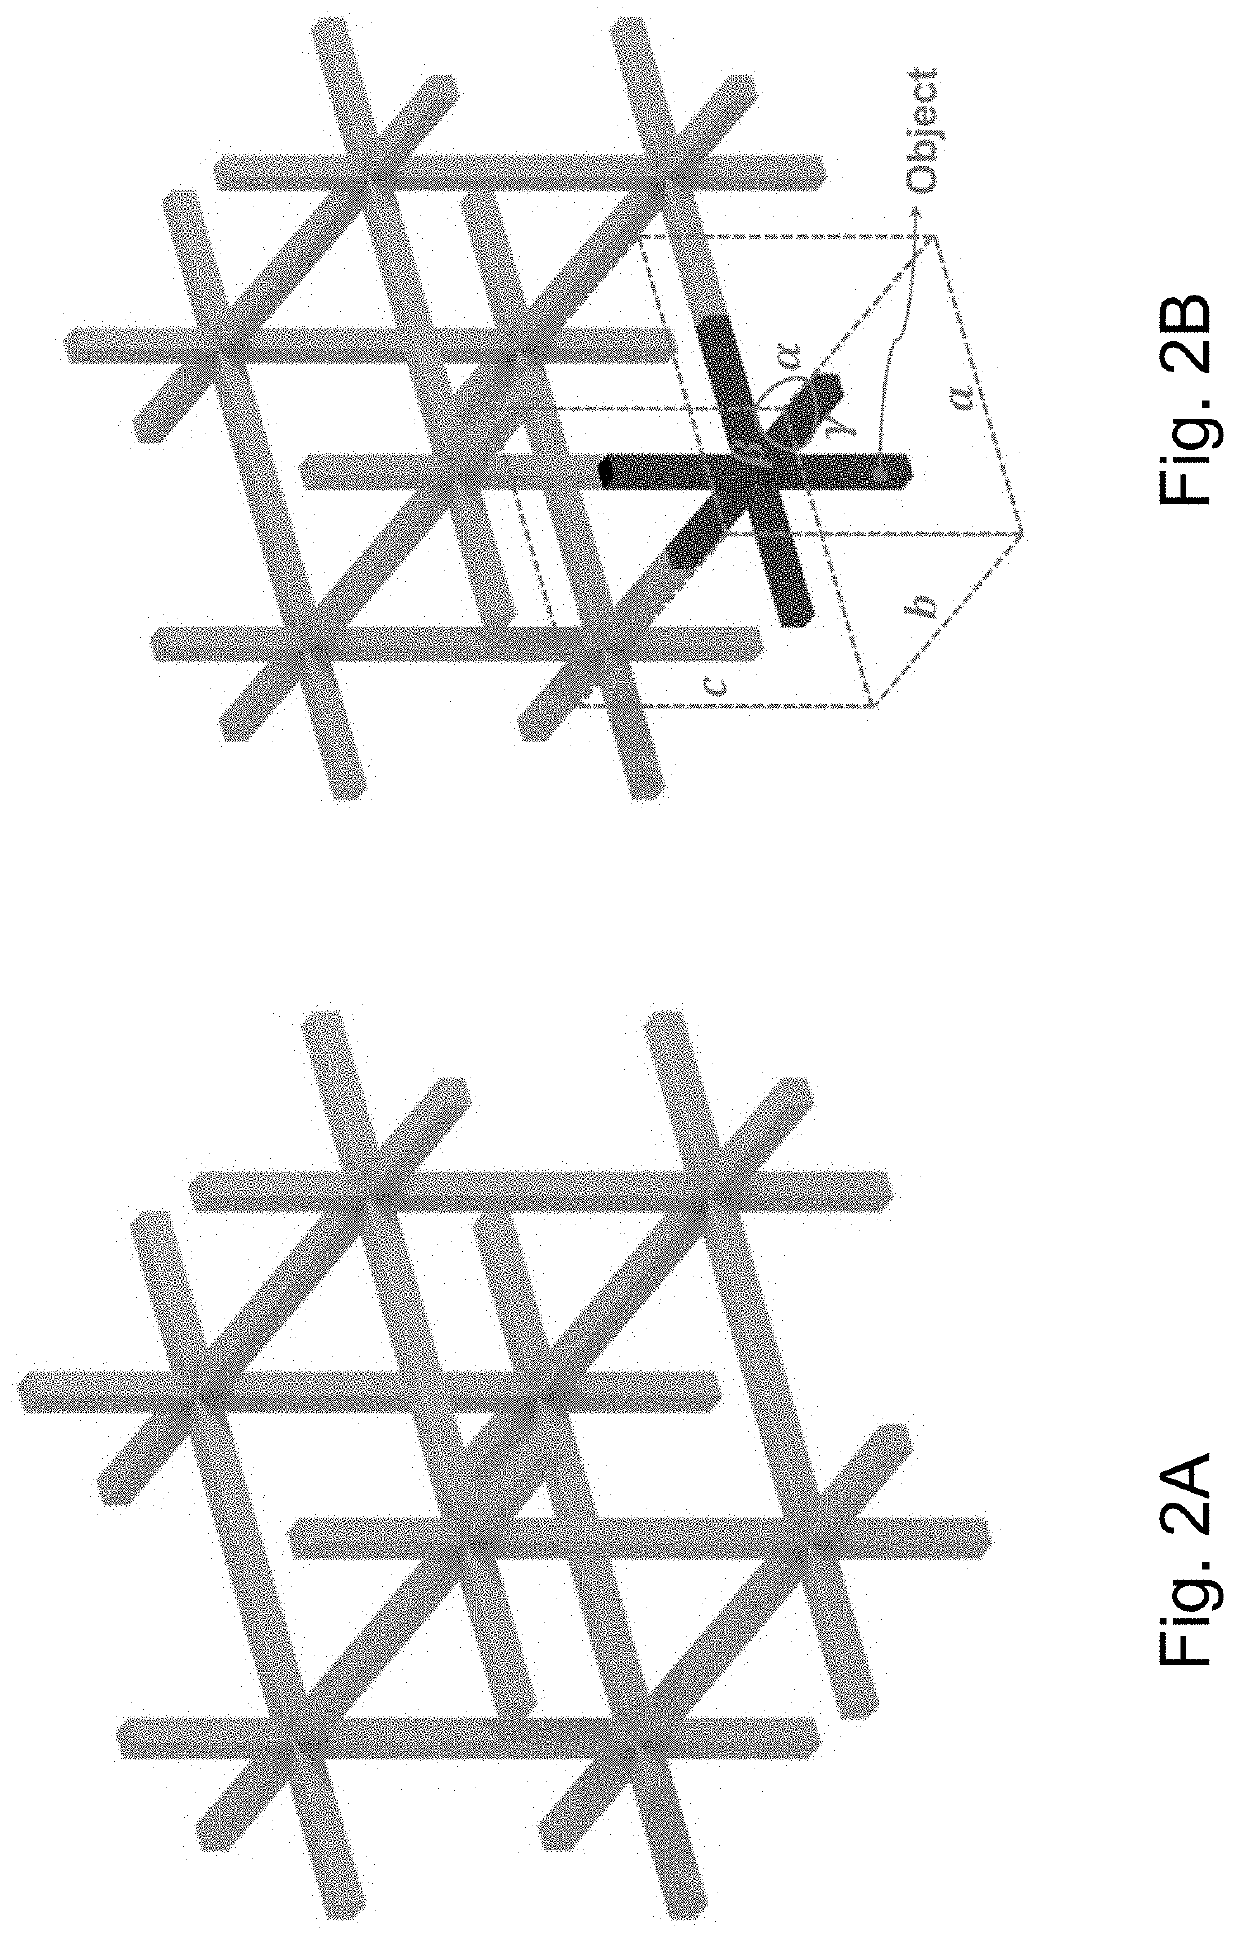 Periodic Cellular Structure Based Design for Additive Manufacturing Approach for Light Weighting and Optimizing Strong Functional Parts